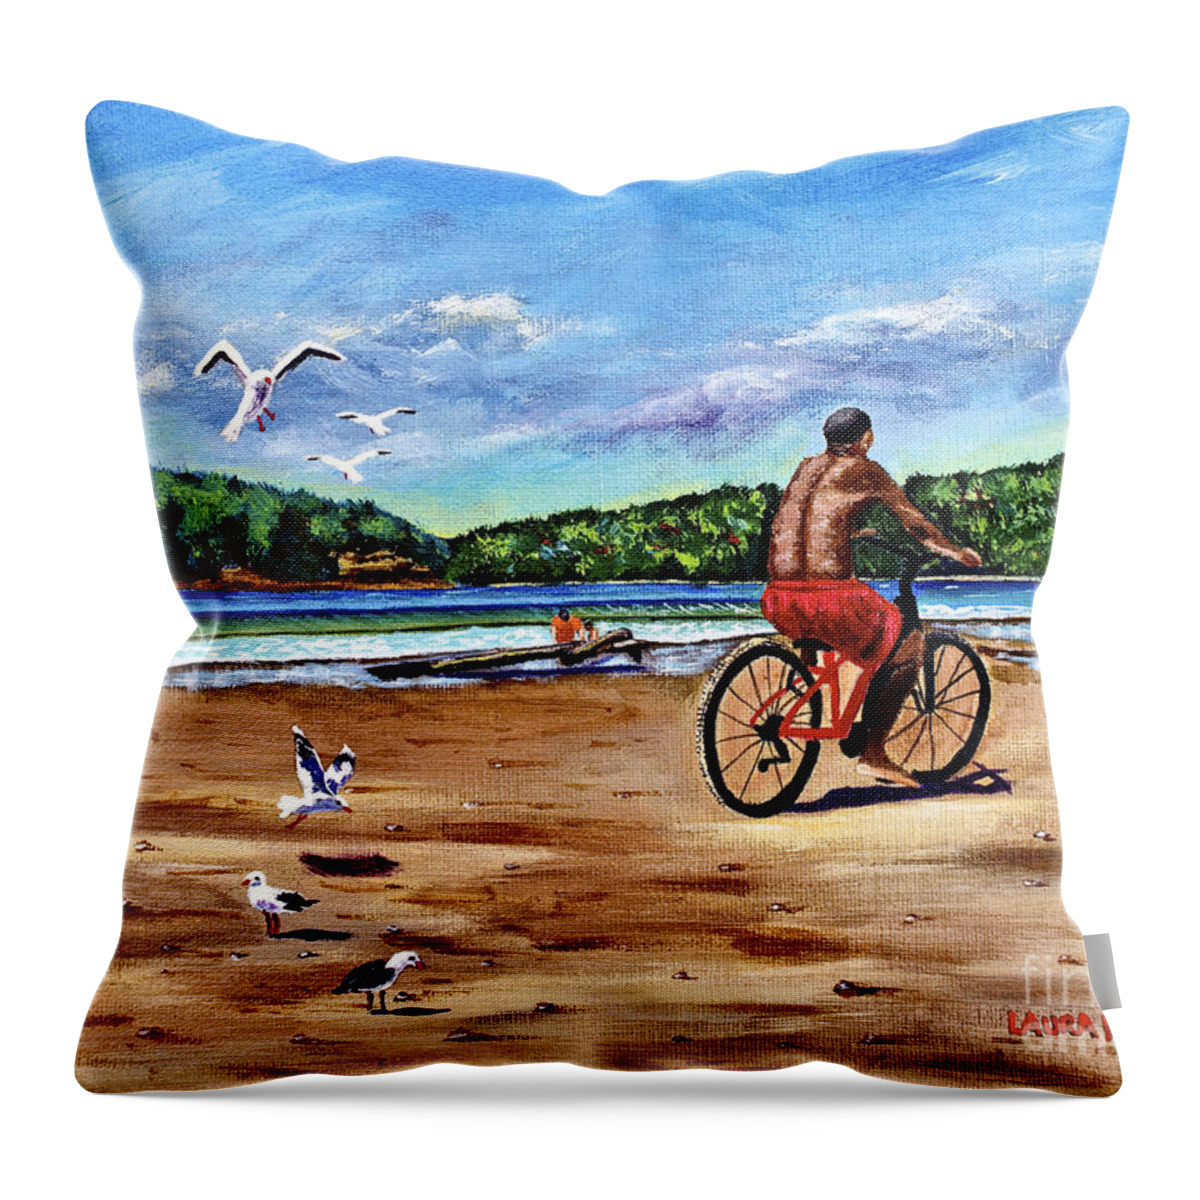 Seascape Throw Pillow featuring the painting Taking a Ride by Laura Forde